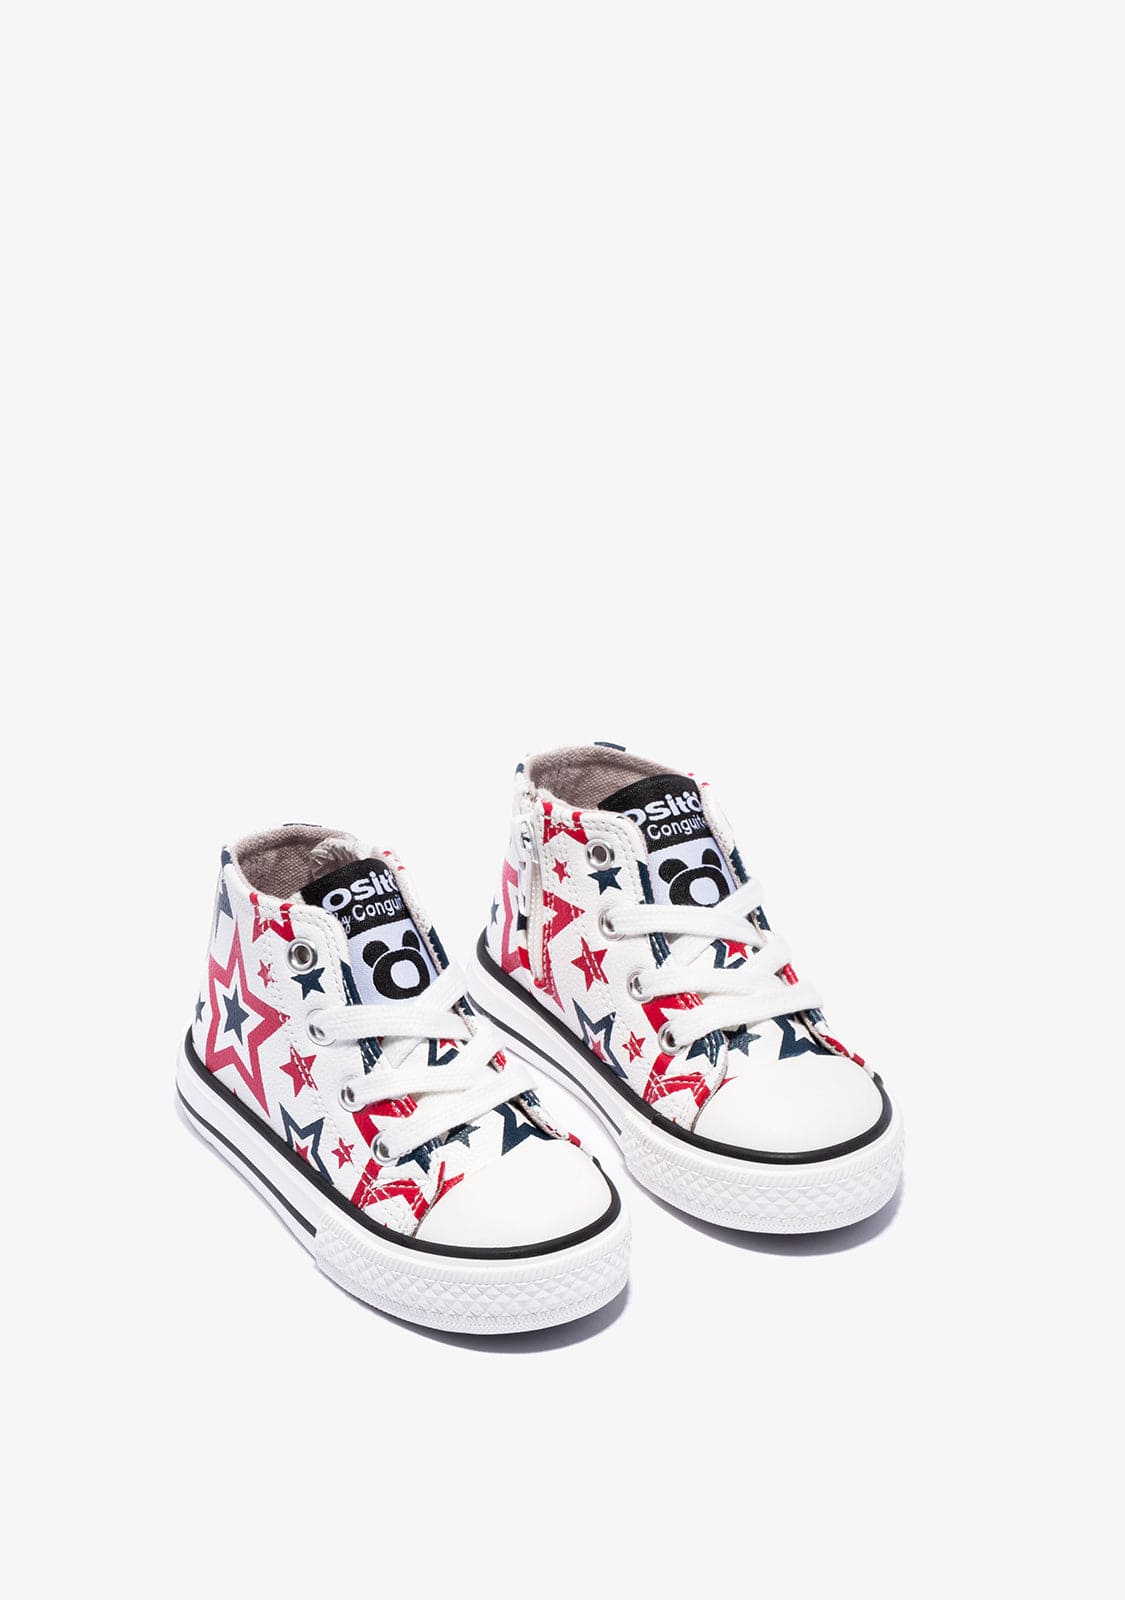 OSITO Shoes Baby Stars High-Top Sneakers White Napa